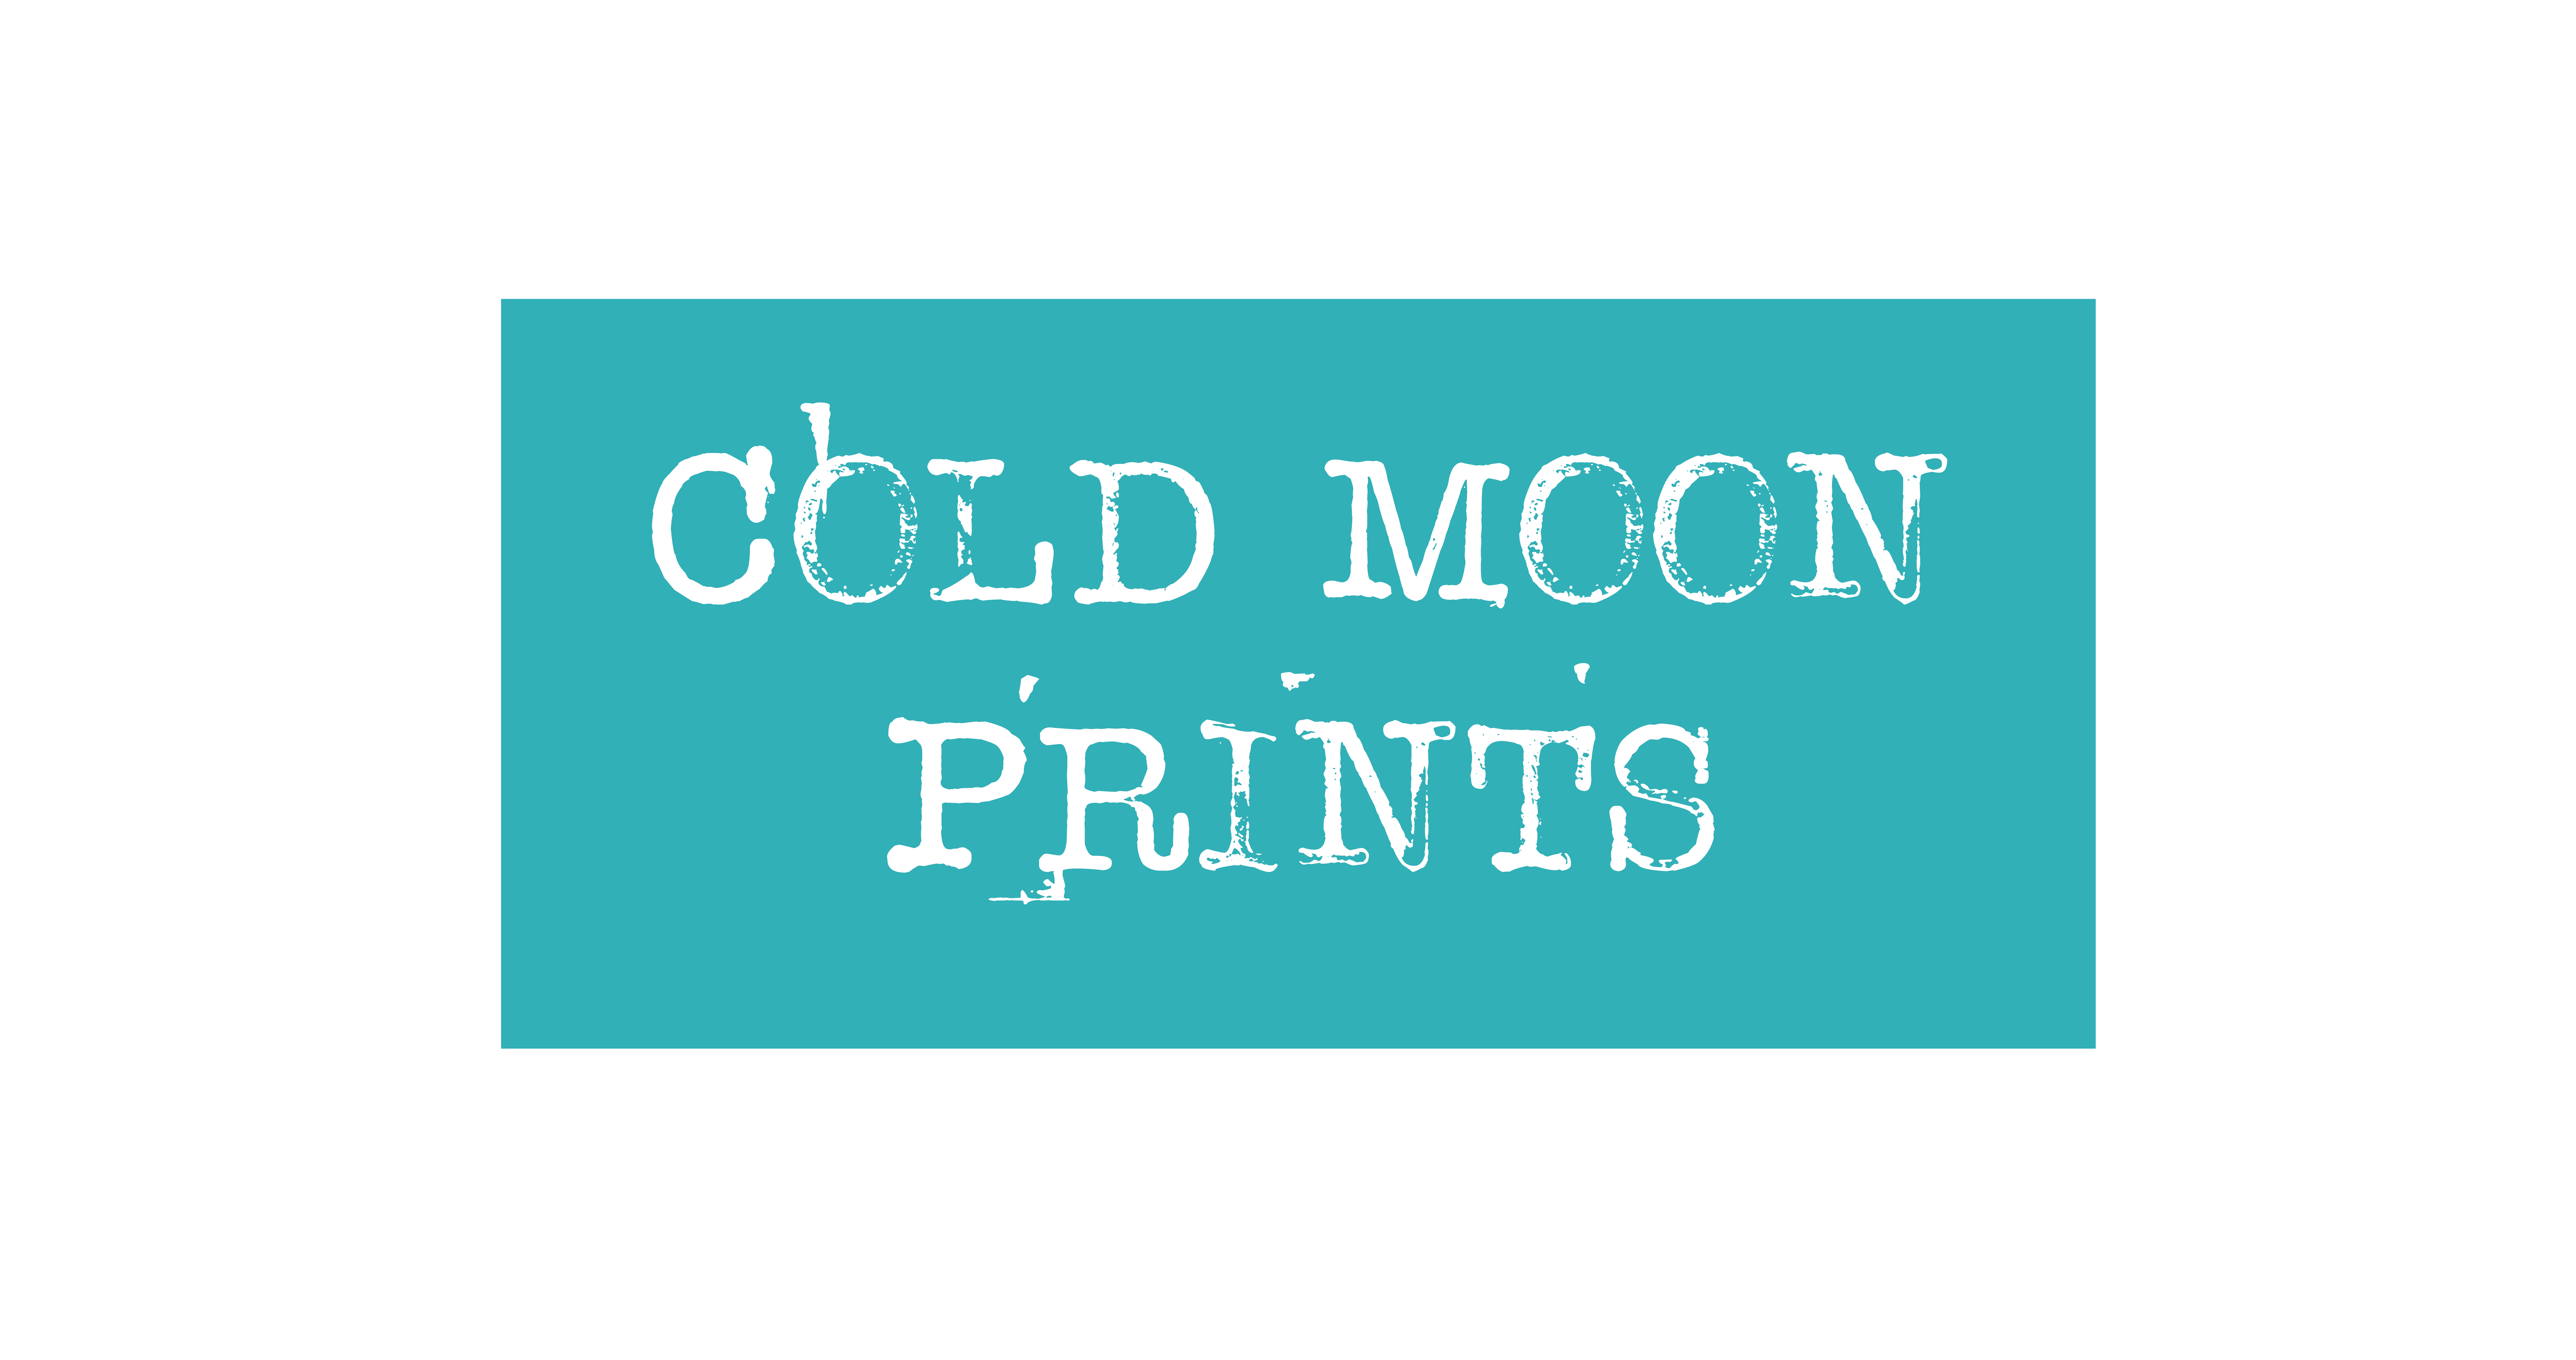 Logo text design for Cold Moon Prints